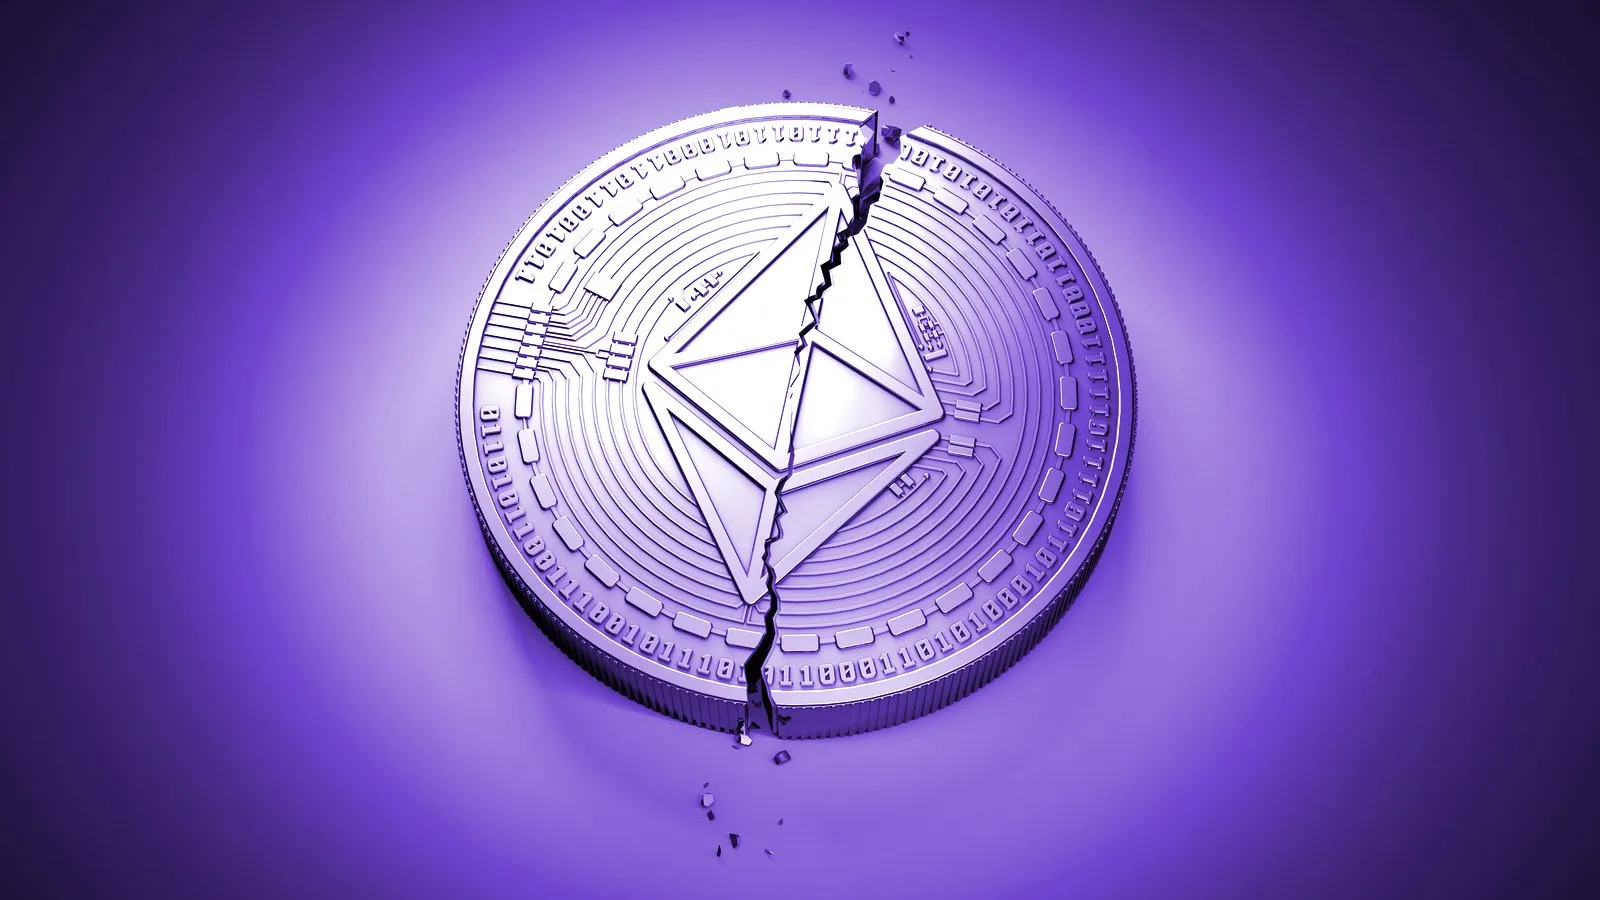 Ethereum is going through some things. Image: Shutterstock